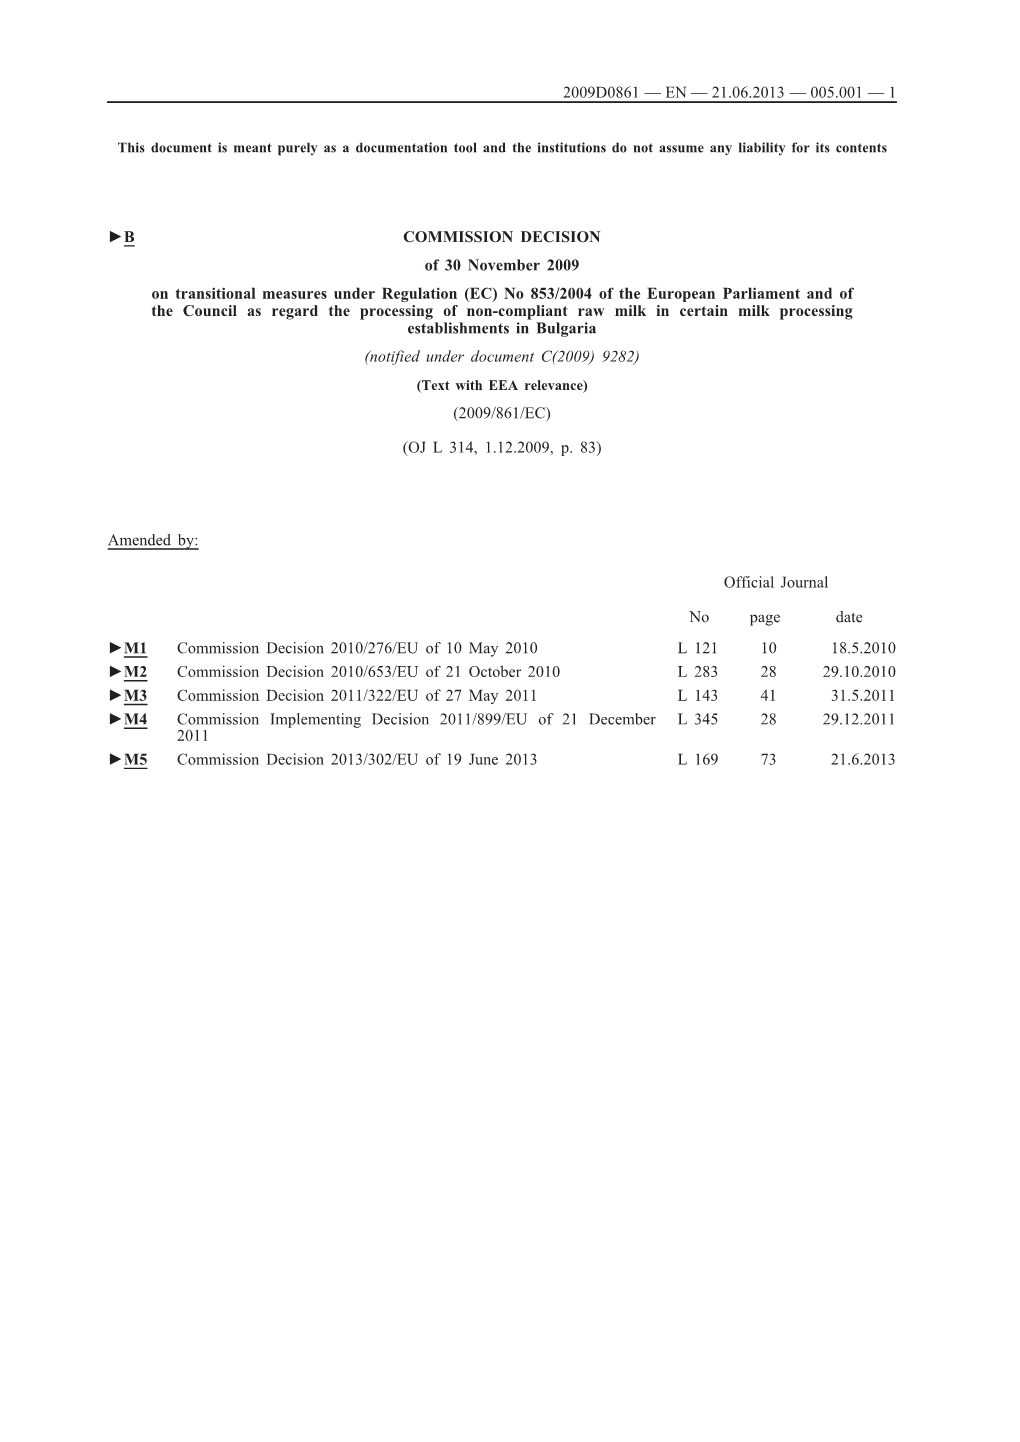 B COMMISSION DECISION of 30 November 2009 on Transitional